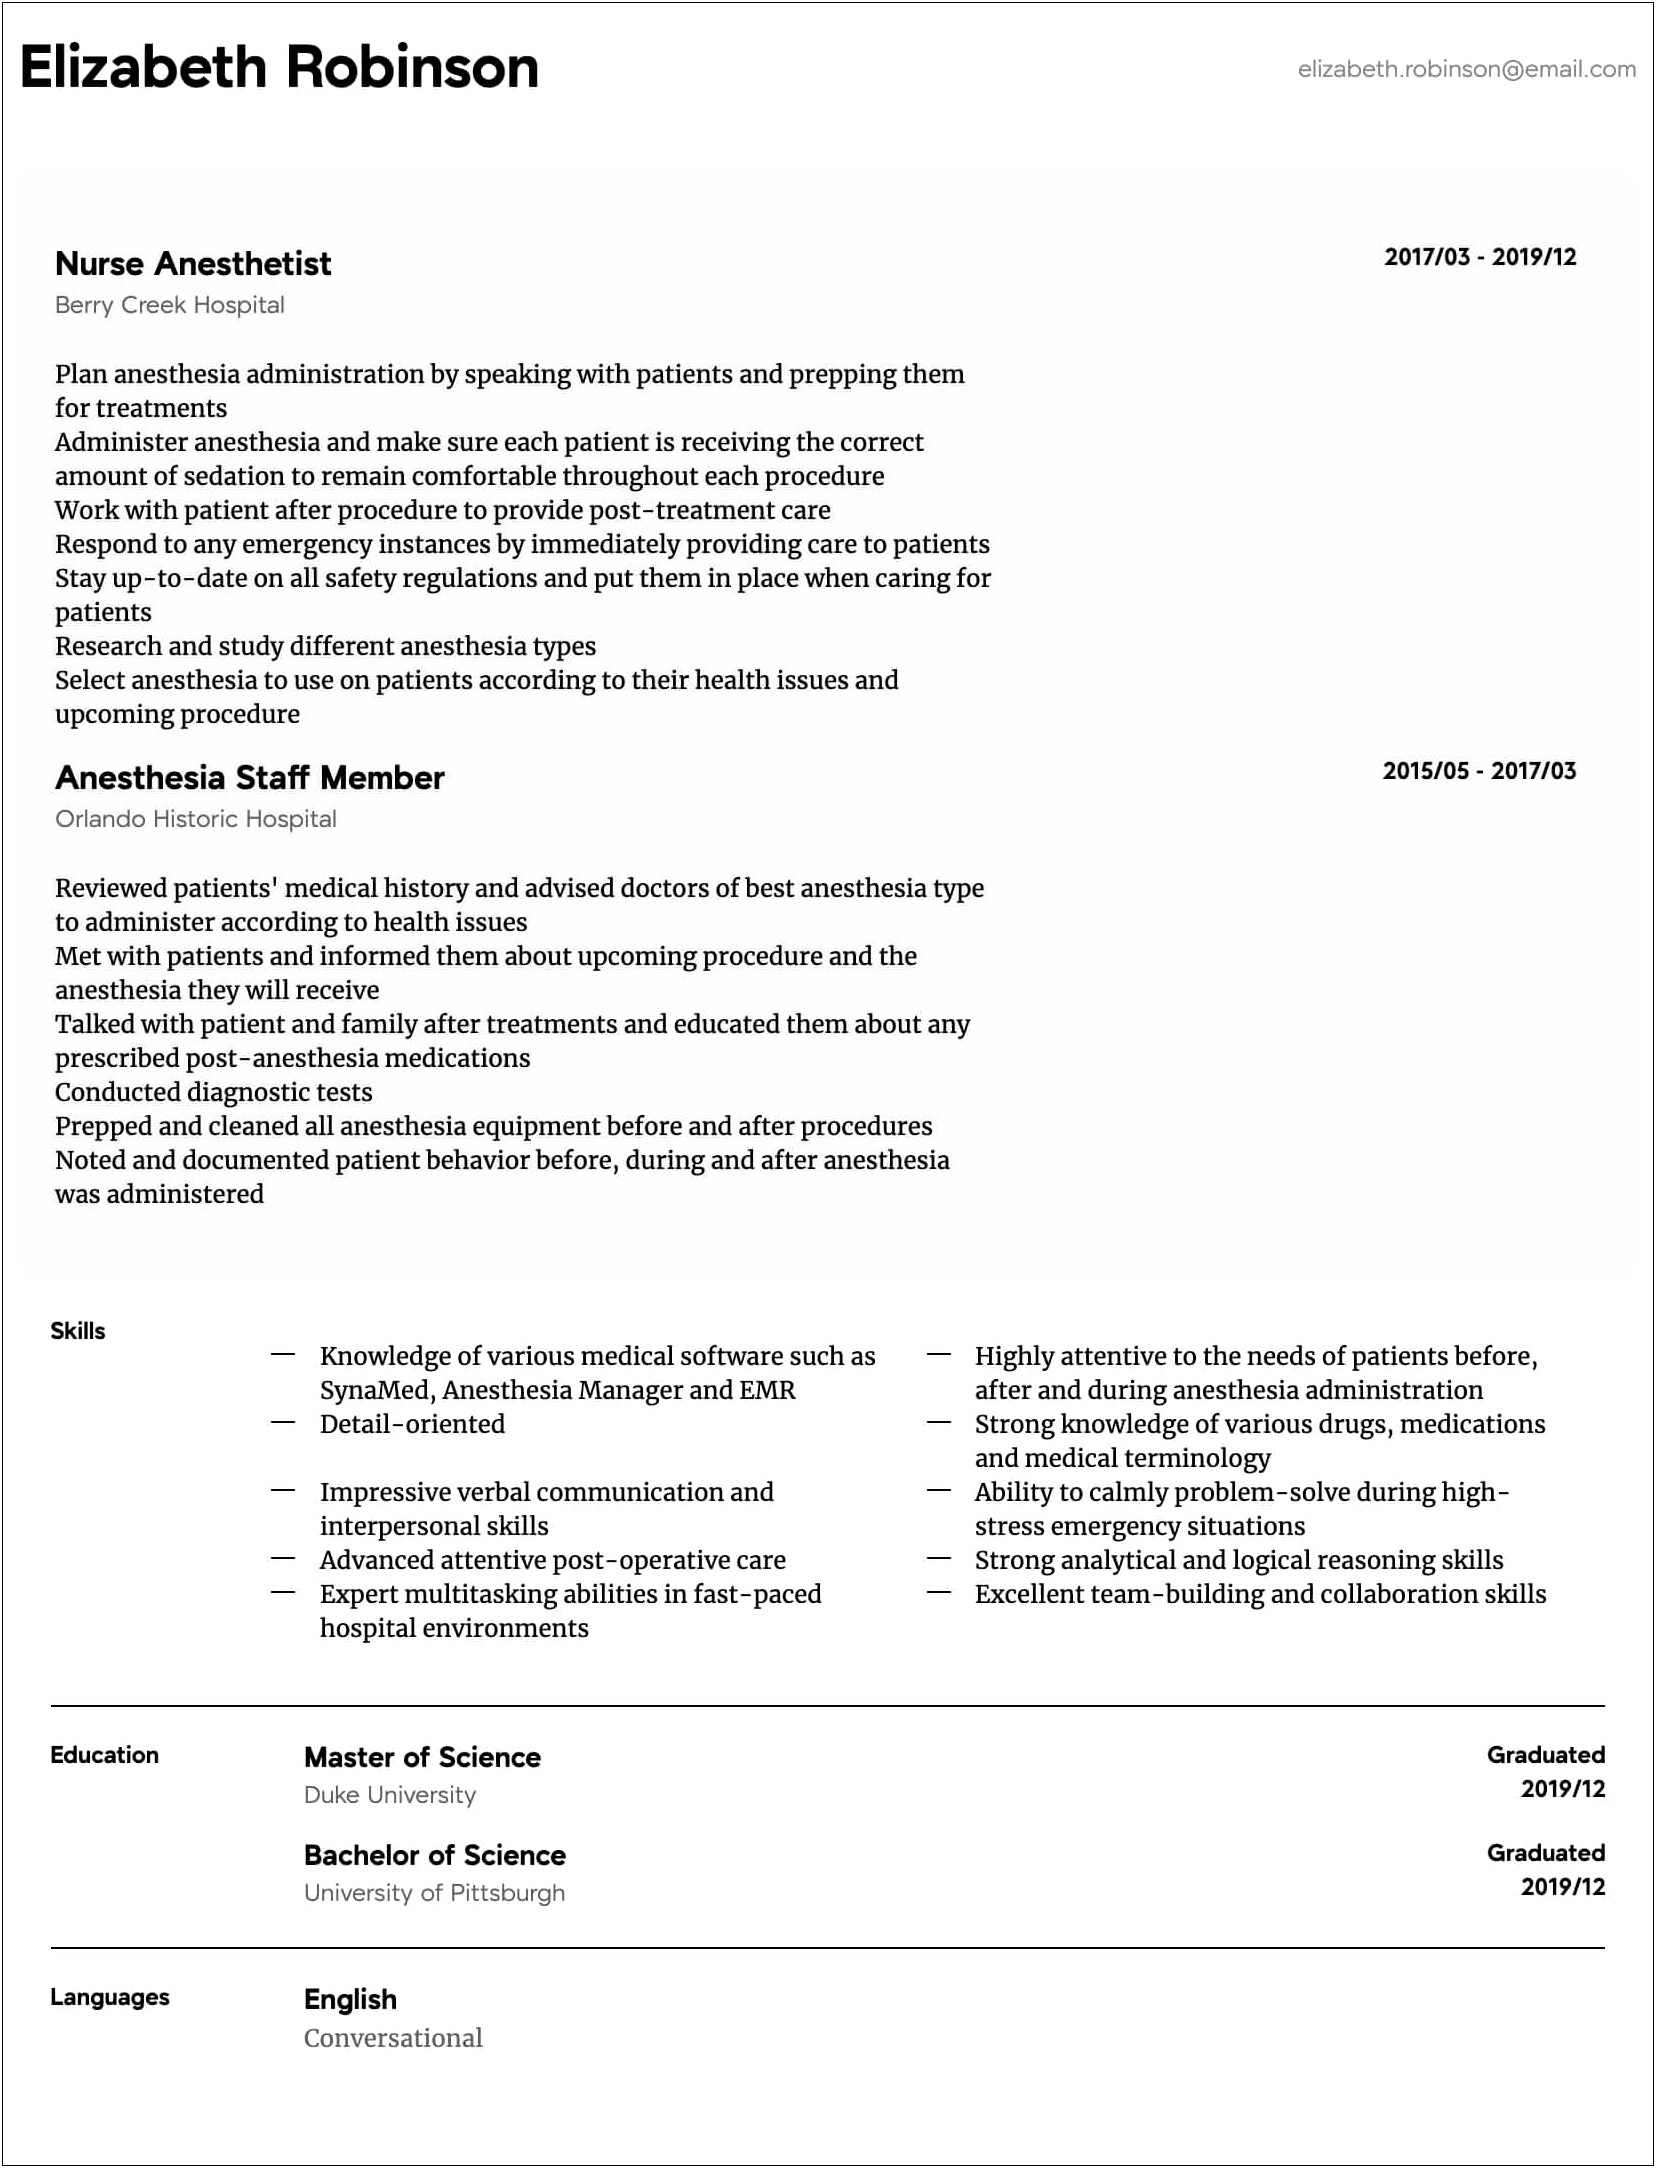 Resume Objectives For Application To Nursing